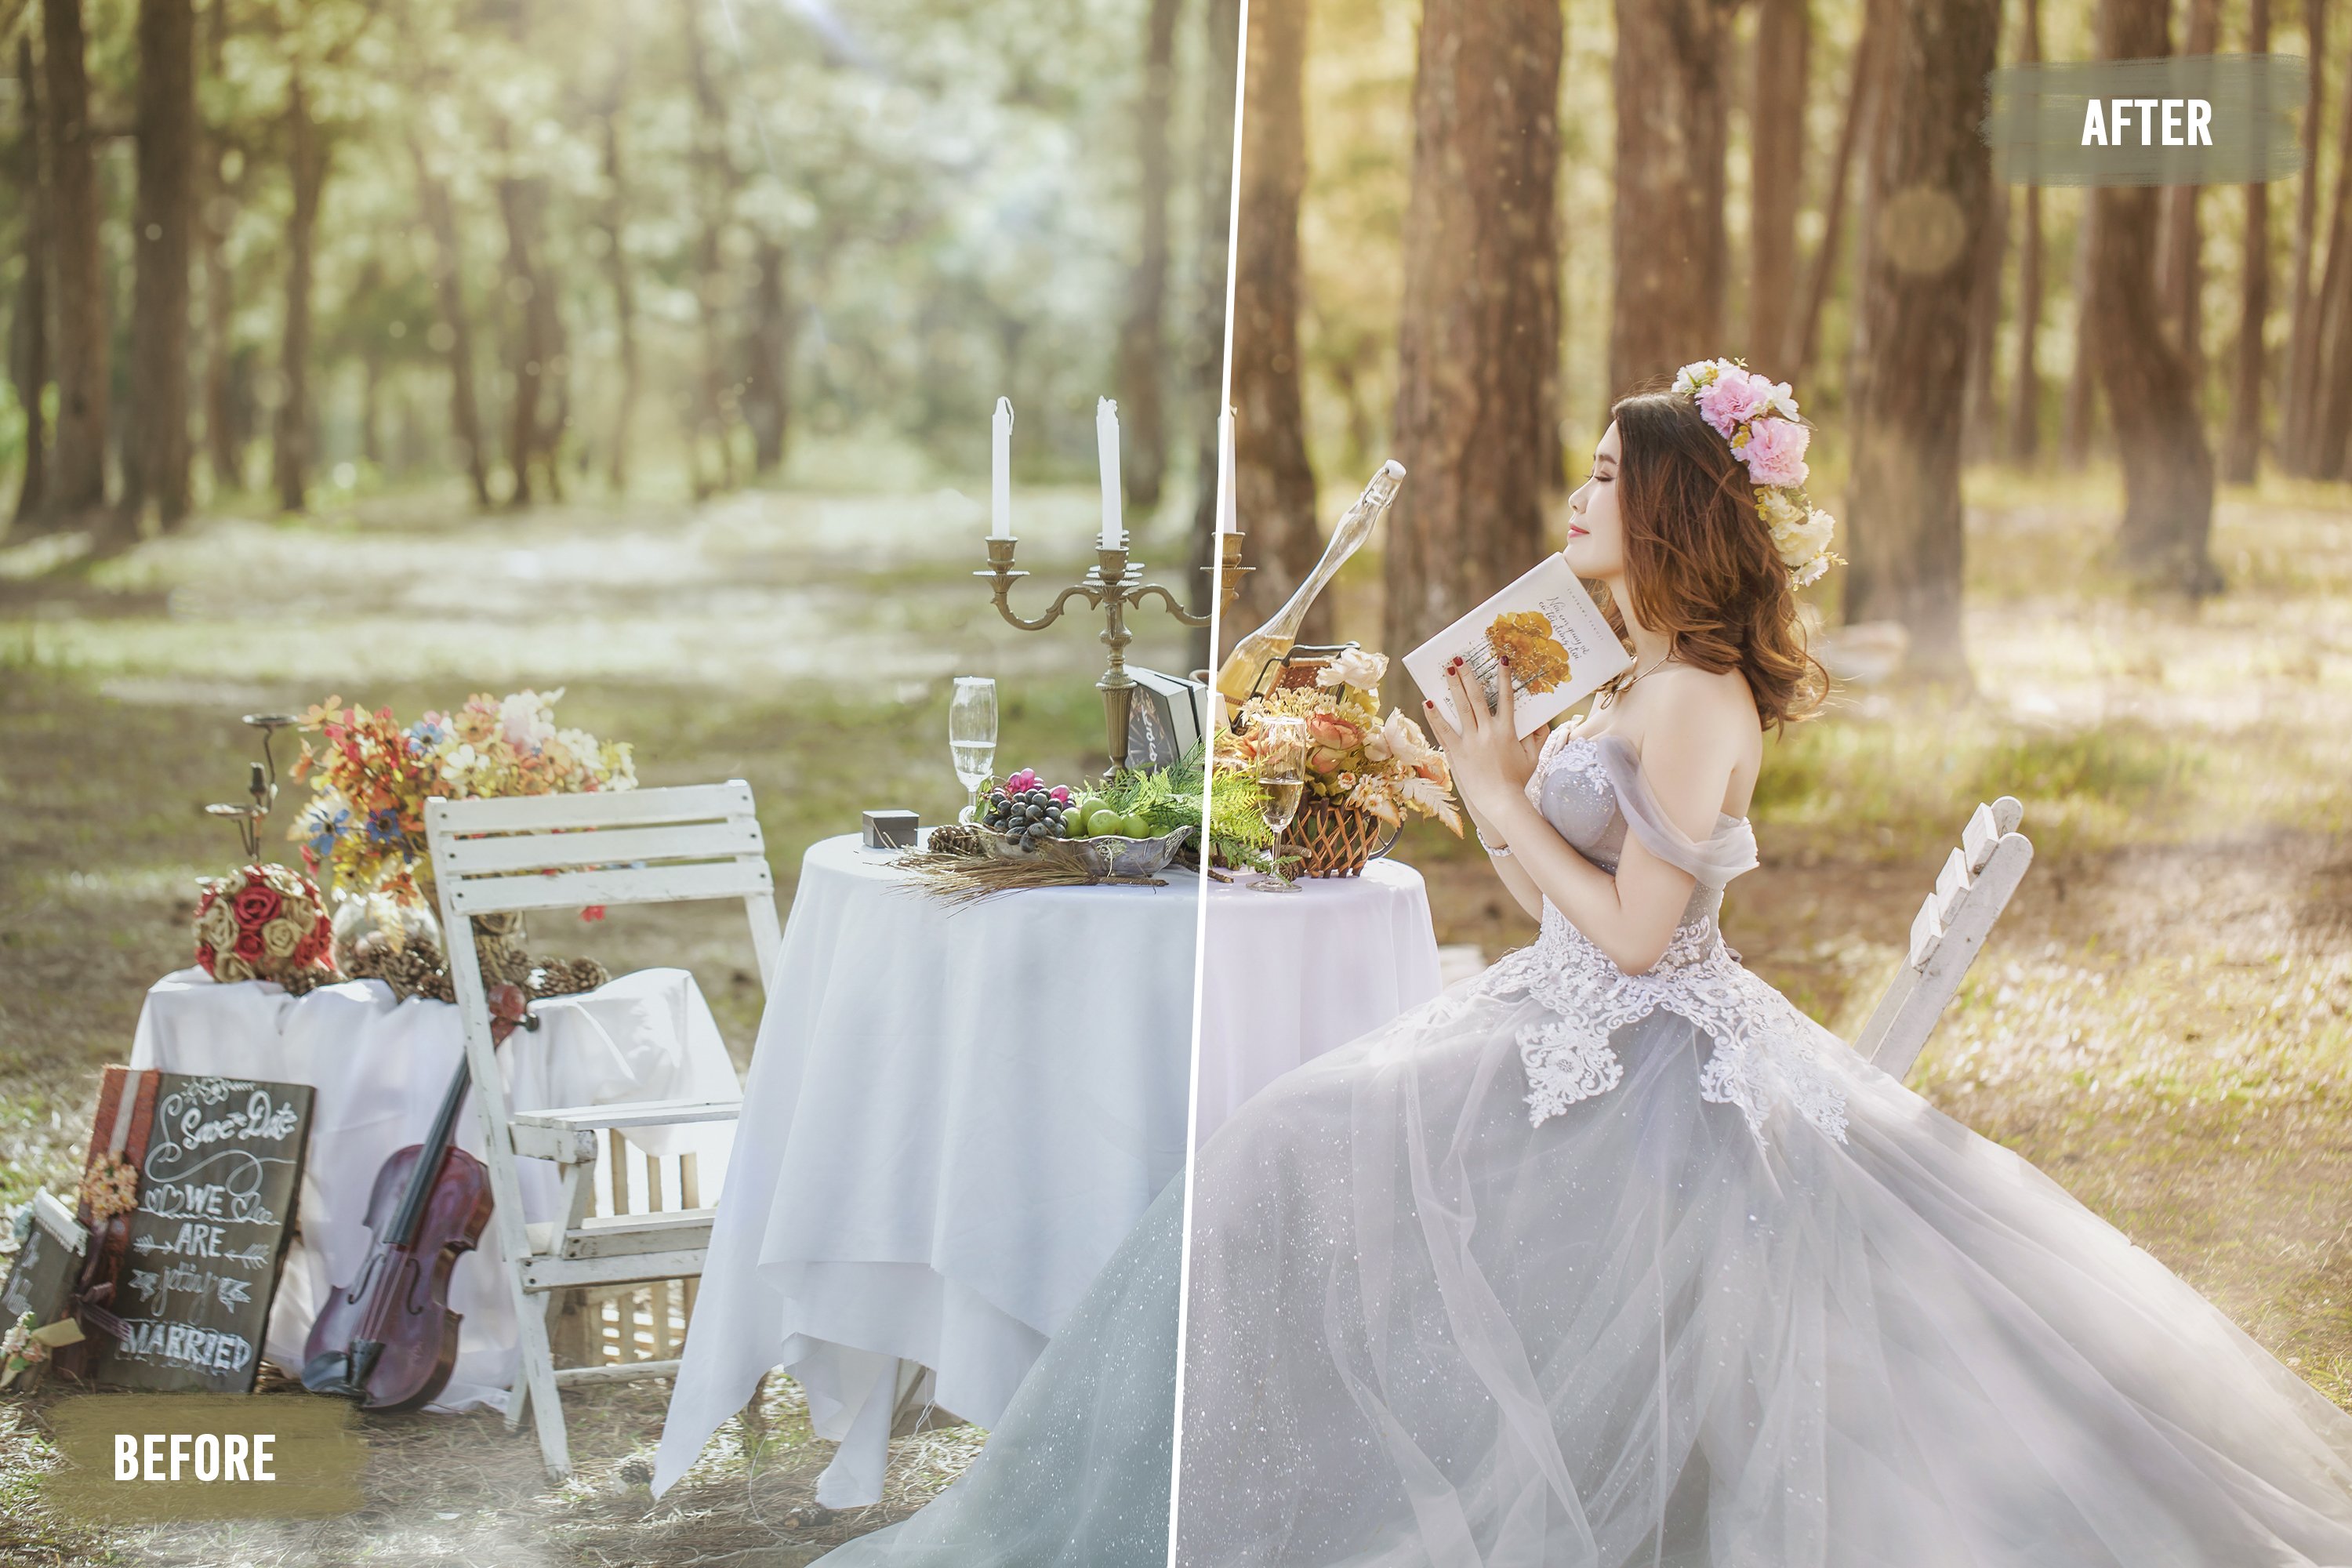 50 Rustic Wedding LUTs Packpreview image.